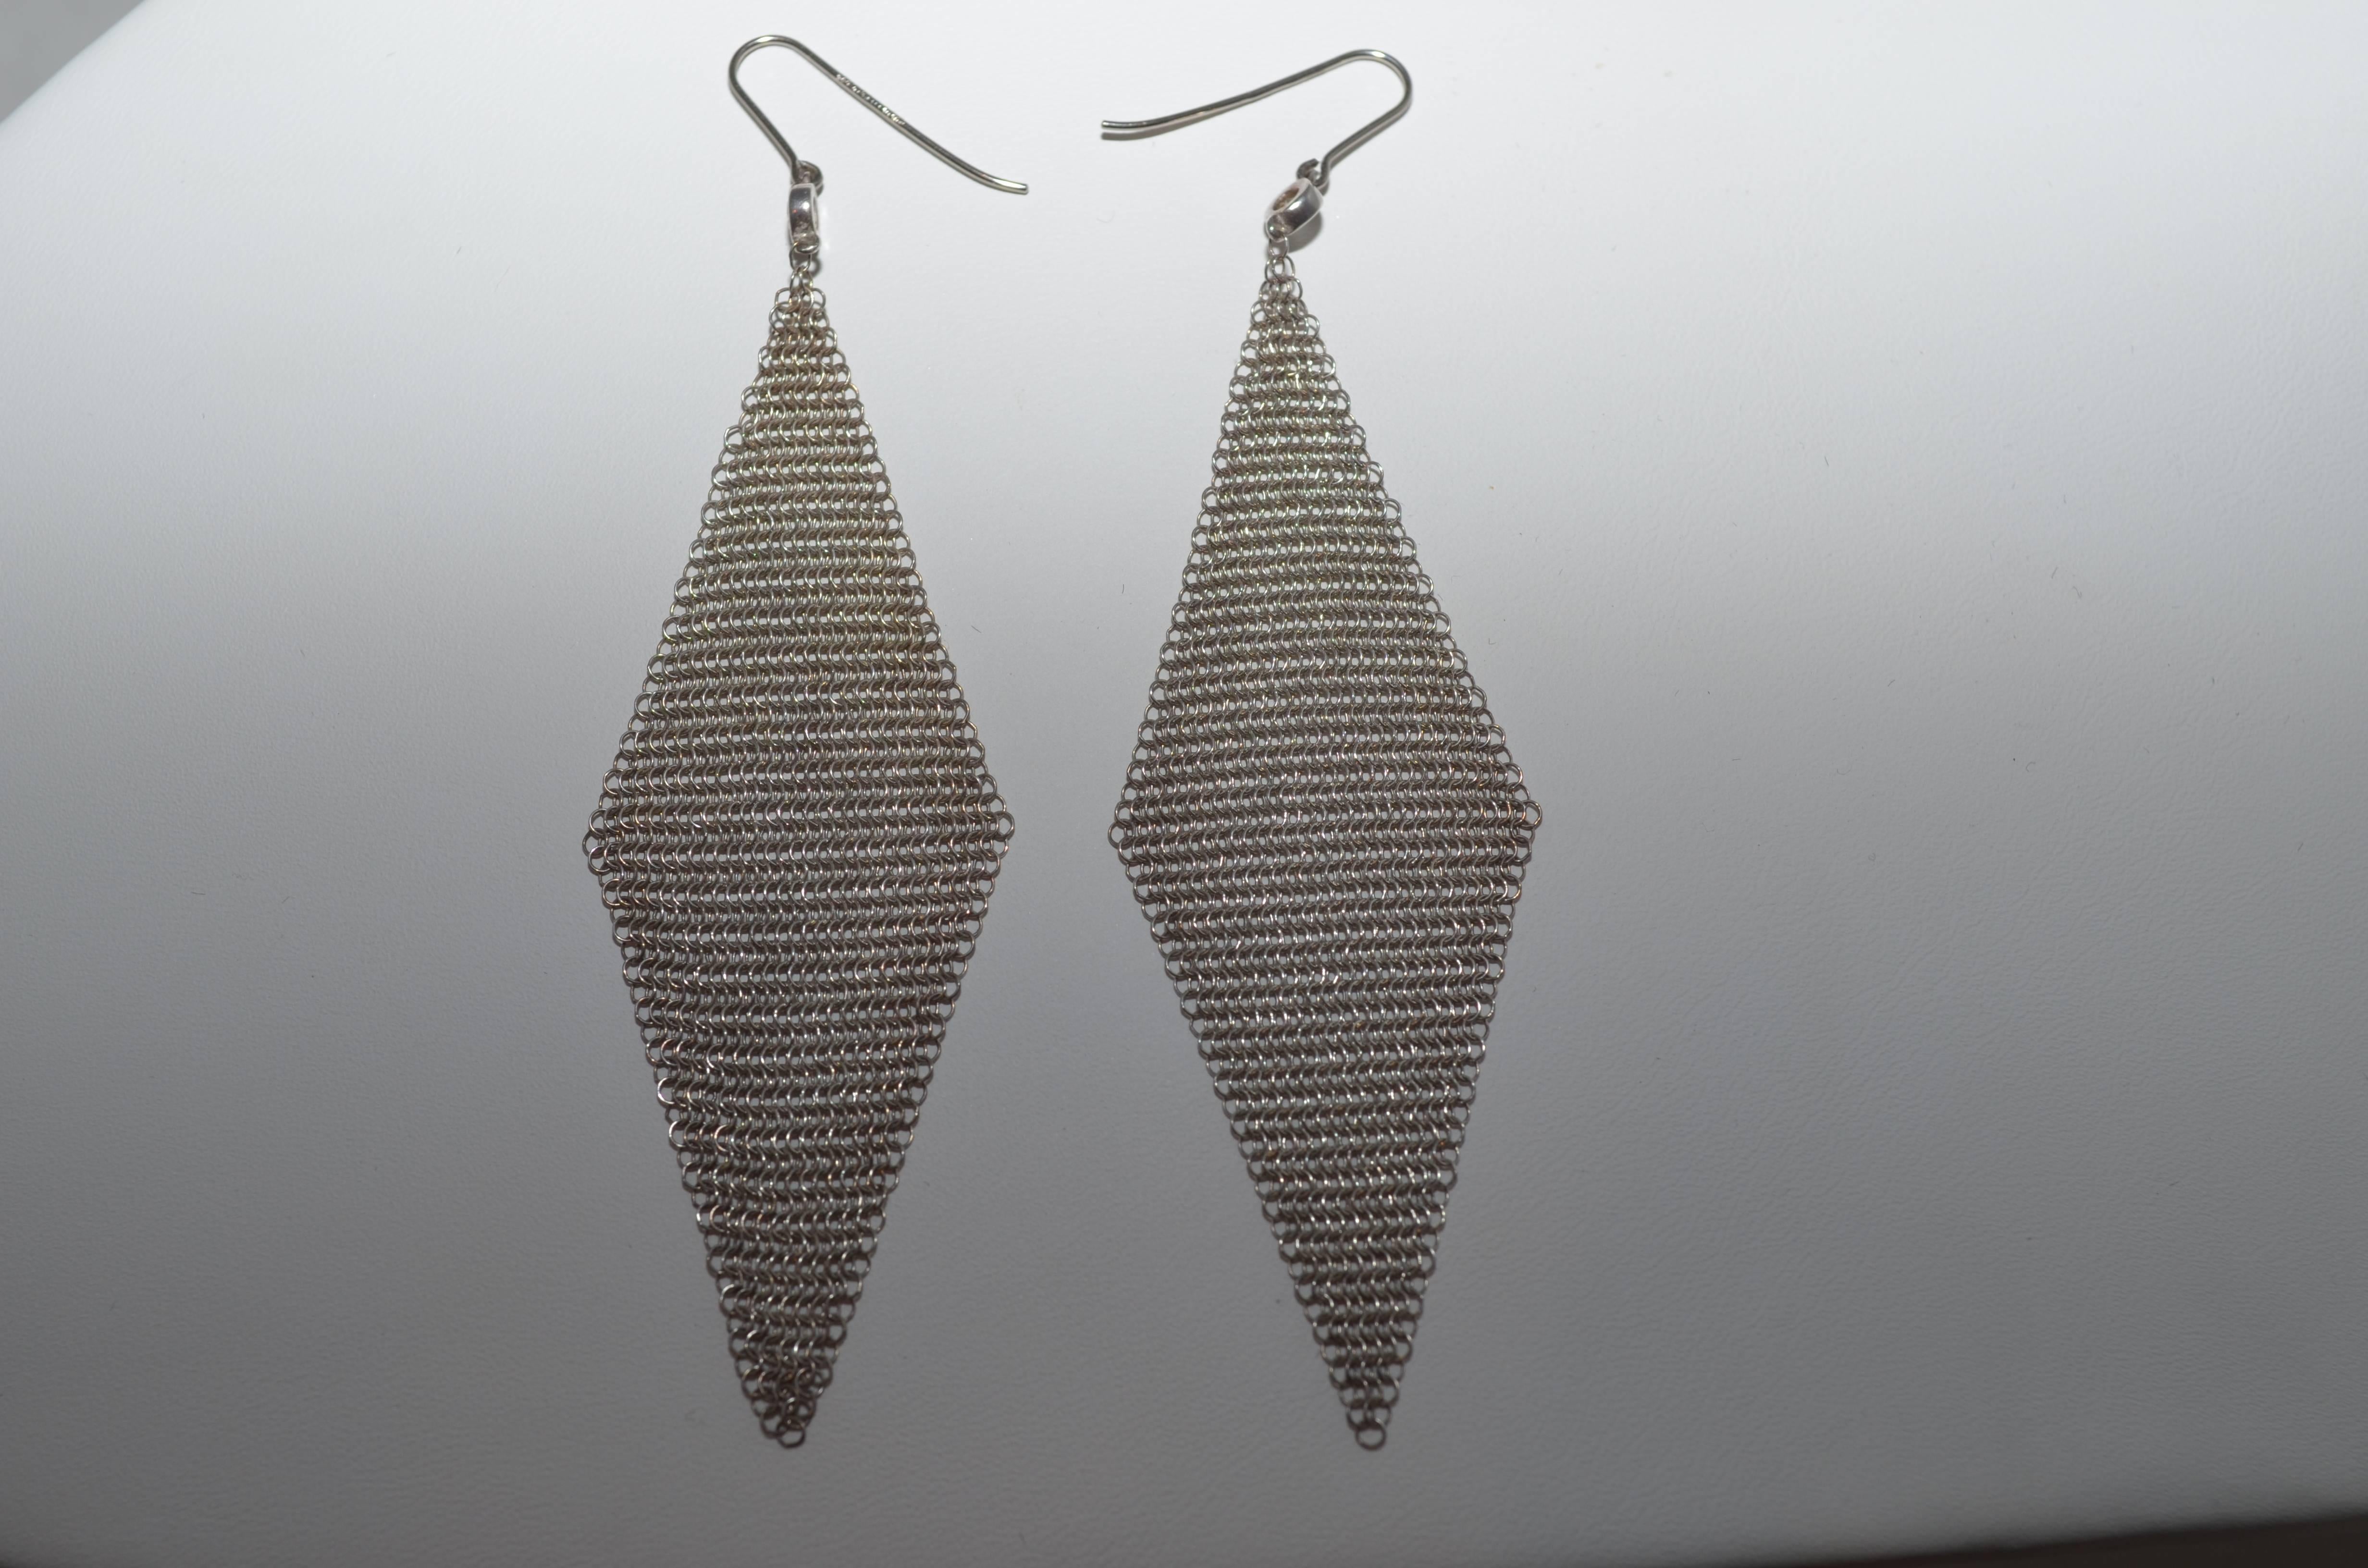 Tiffany & Co. Elsa Peretti Sterling Silver Mesh Scarf Earrings with Diamonds

One of Elsa Peretti's most popular designs for Tiffany & Co. Tiffany & Co. mesh scarf earrings in sterling silver with round  diamonds. Earrings are 3.25 inches long